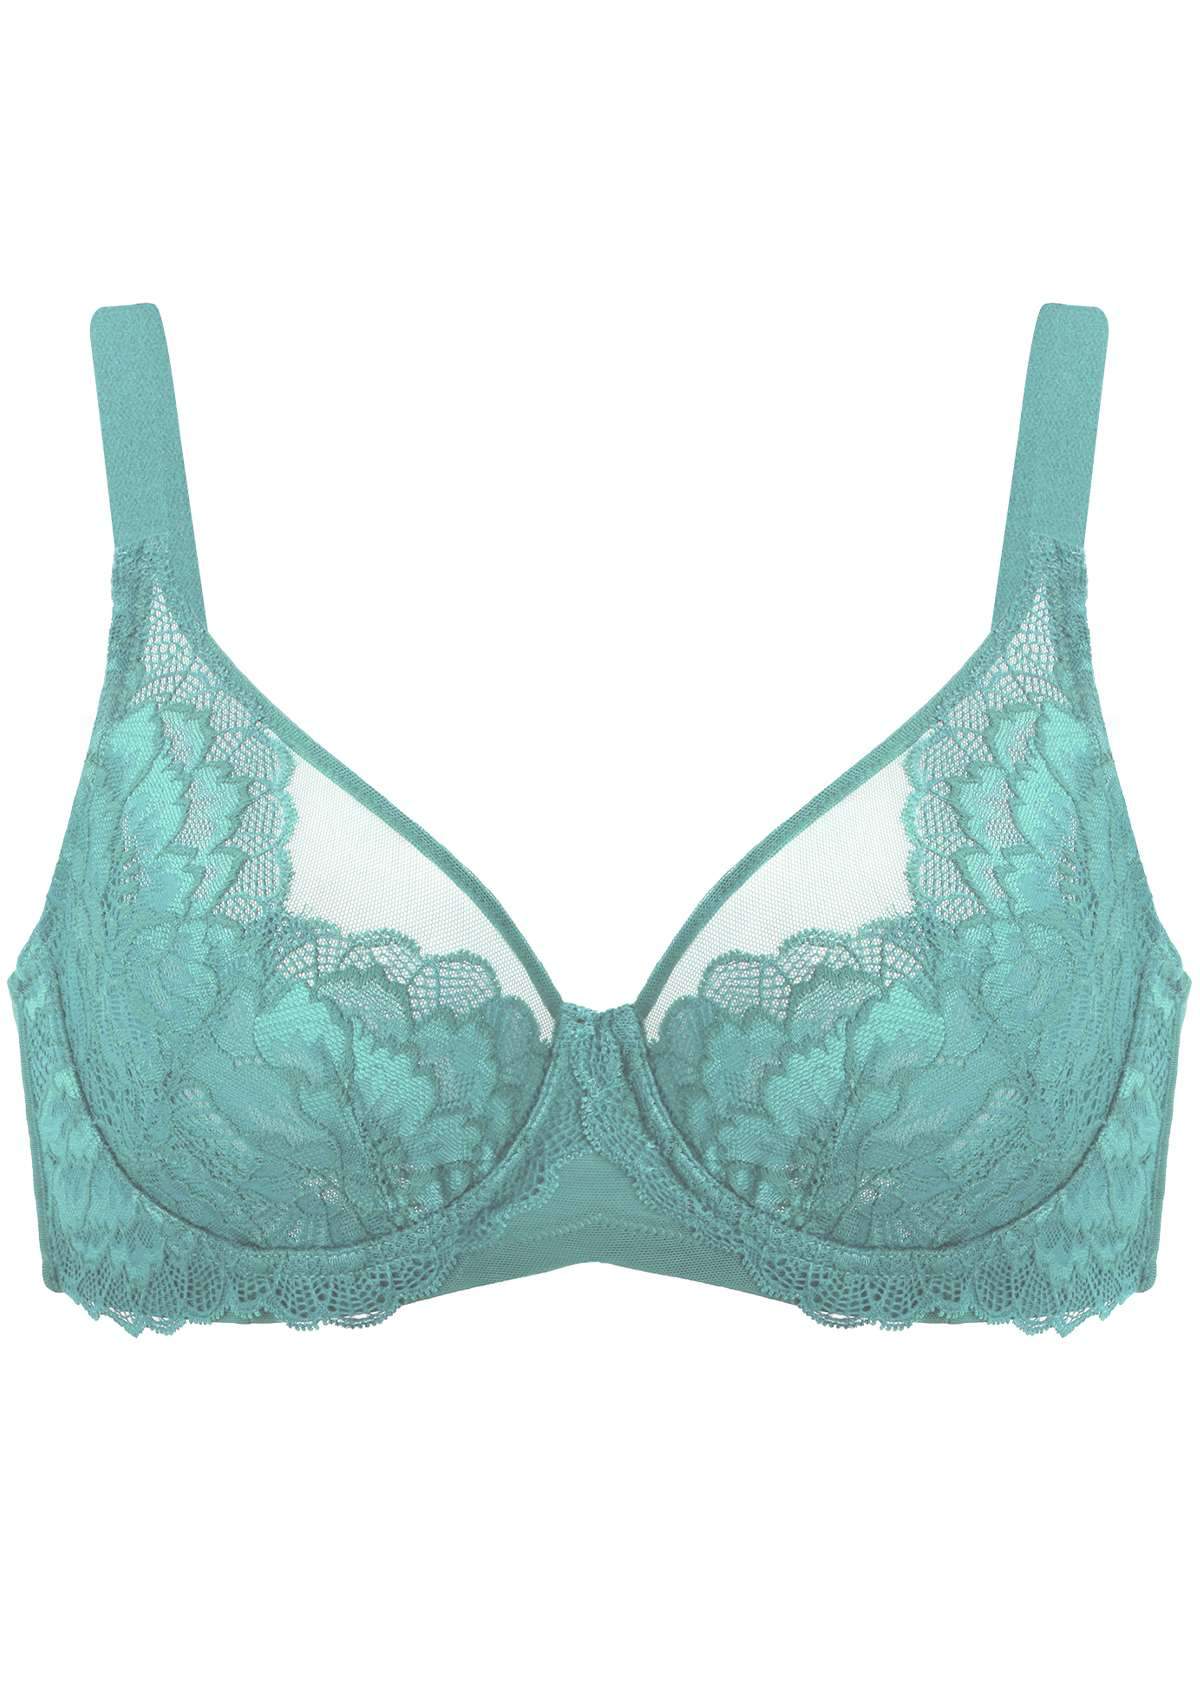 HSIA Paeonia Lace Full Coverage Underwire Non-Padded Uplifting Bra - Purple / 38 / D